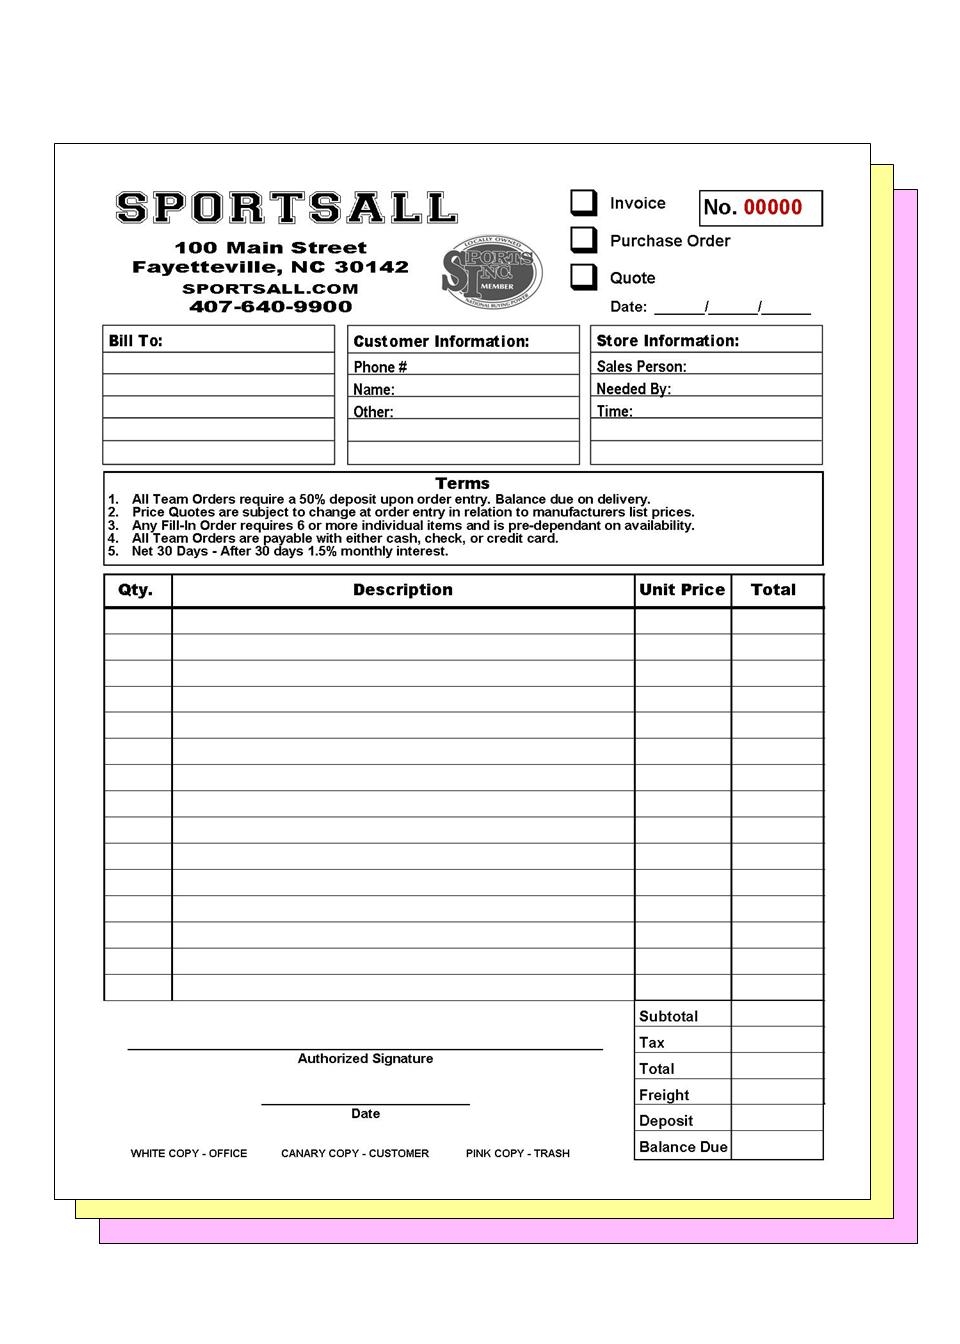 fayette printing fayetteville and atlanta ga quick copy carbonless invoice printing